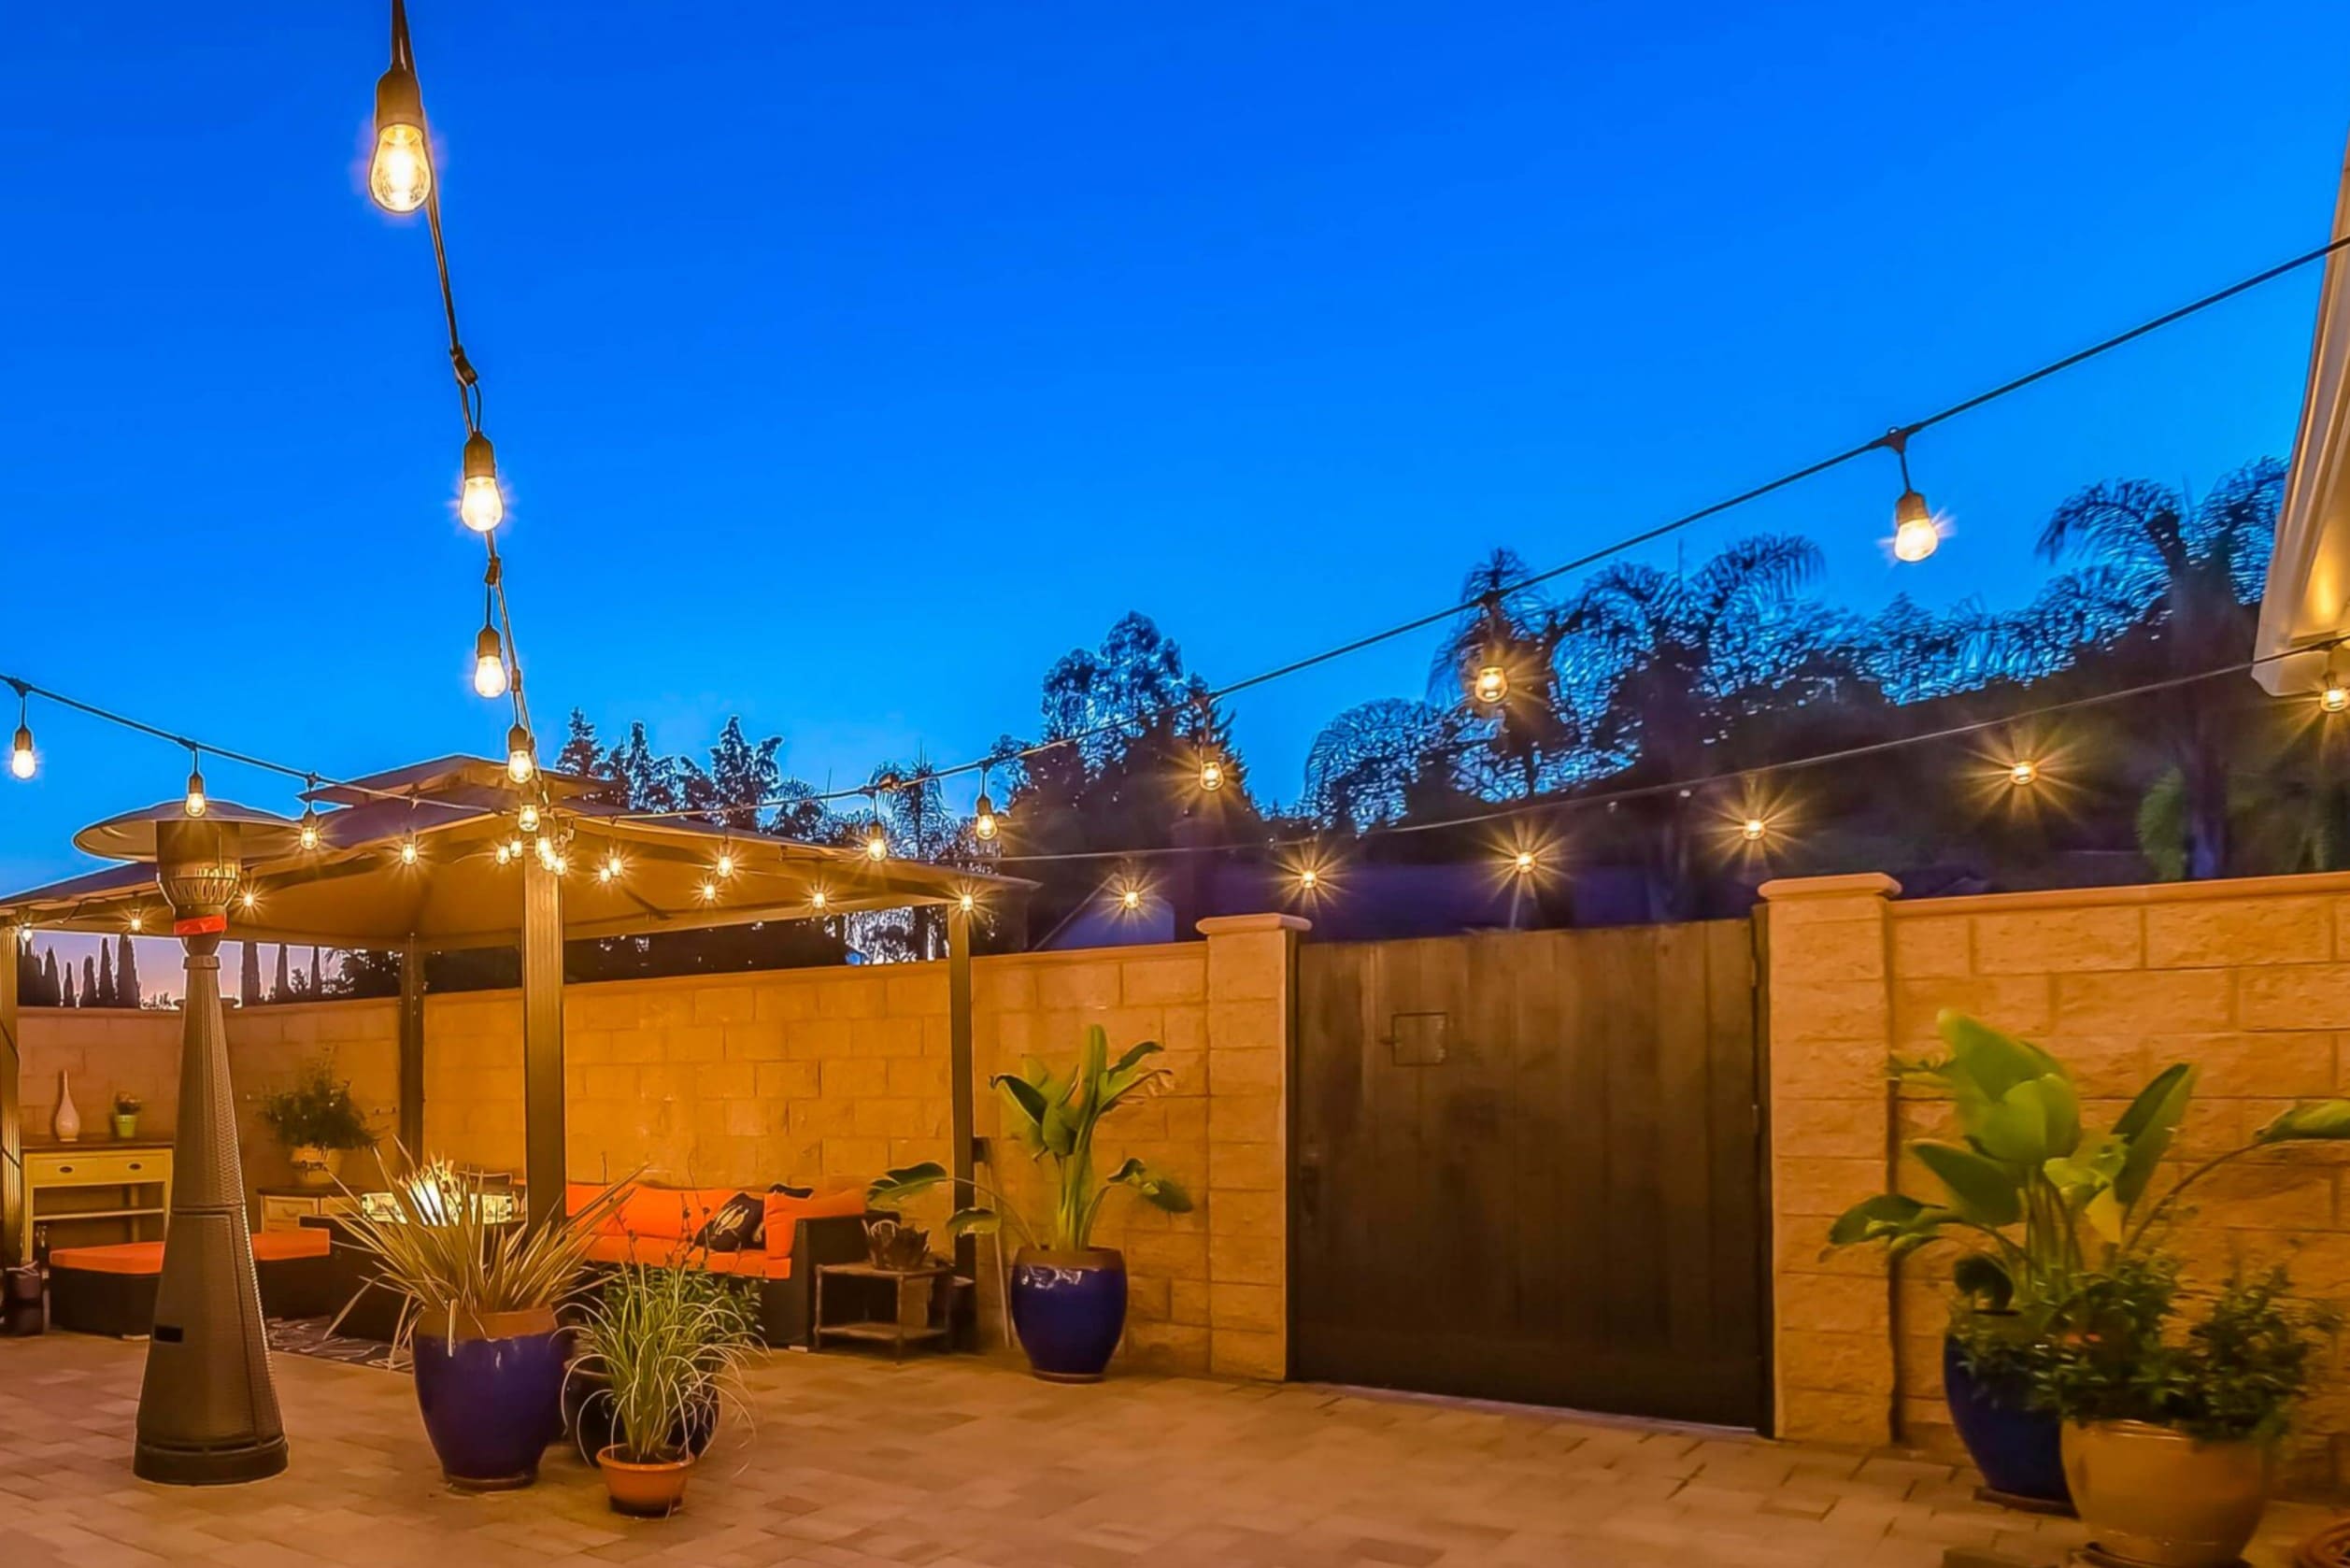 How To Have Outdoor Lights Without An Outlet